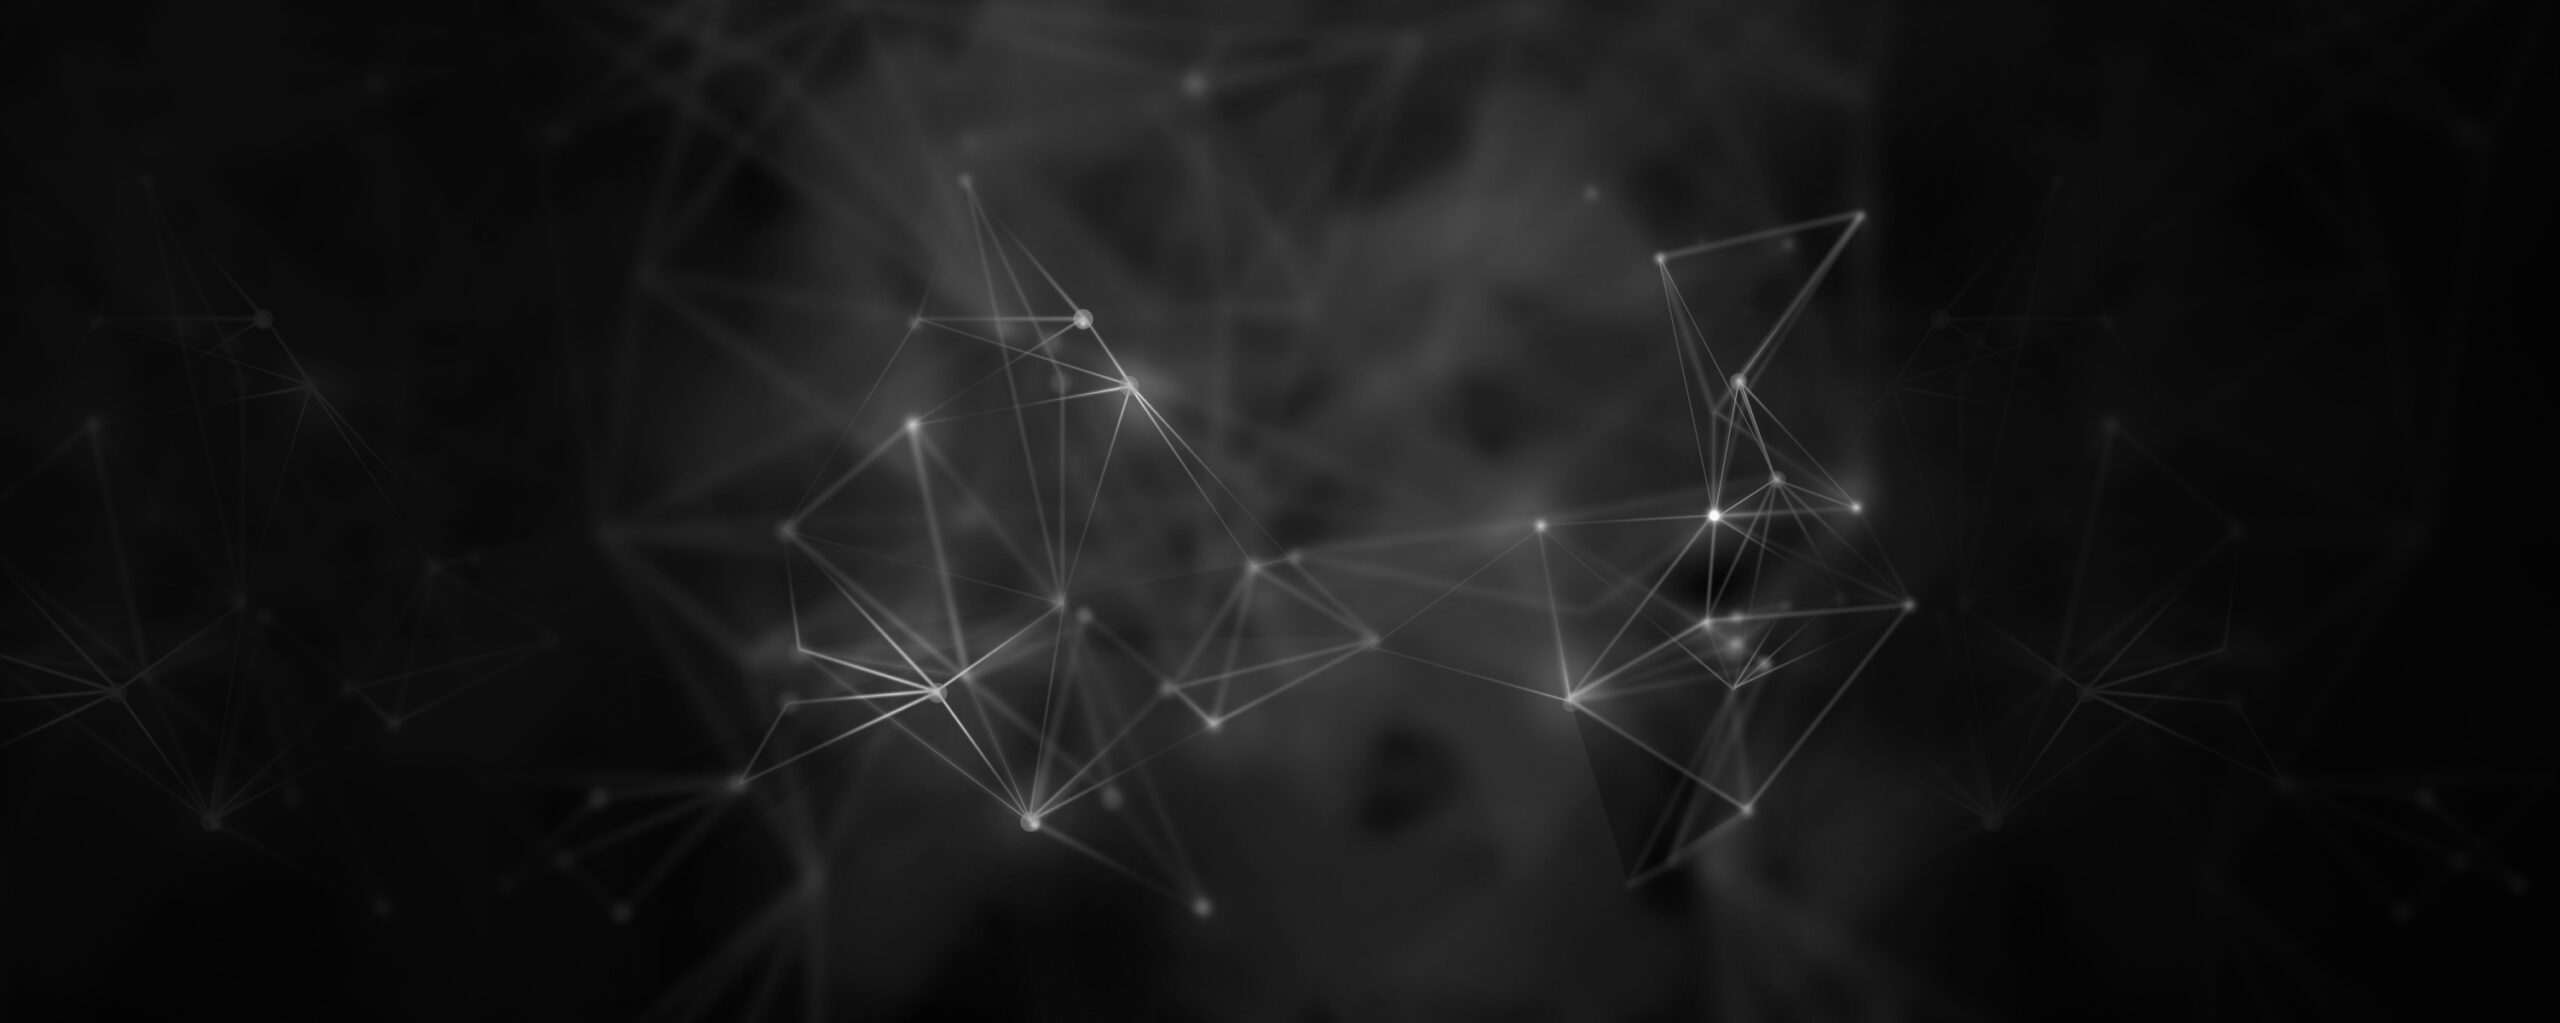 Dark abstract image of a network cloud.